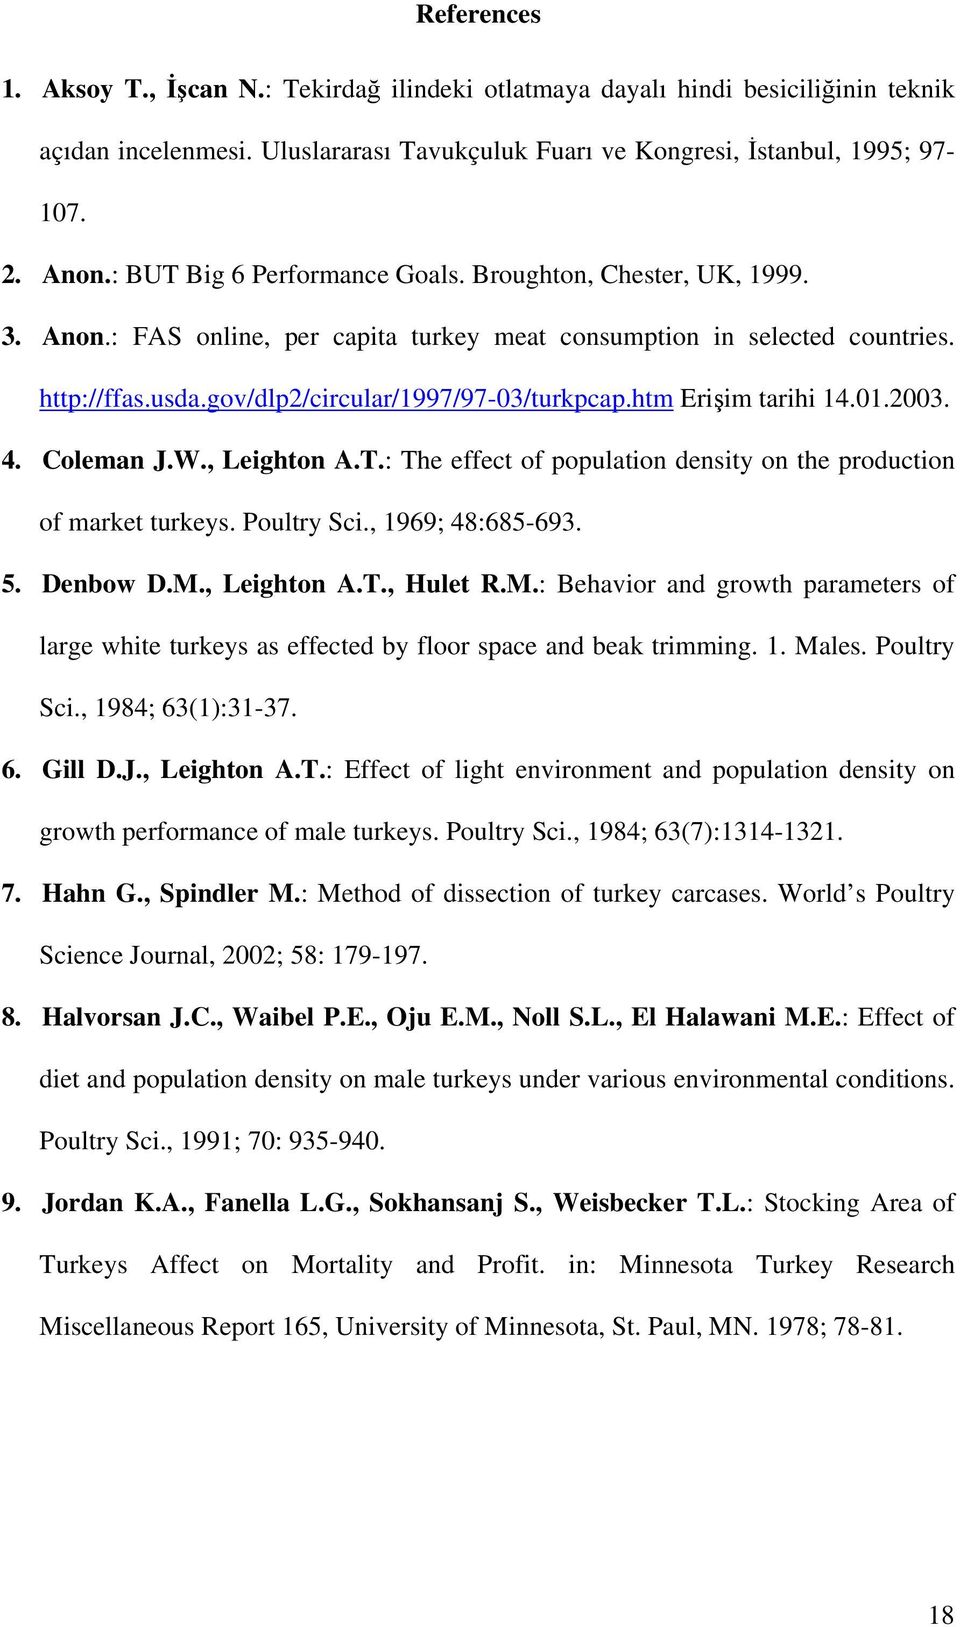 htm Erişim tarihi 14.01.2003. 4. Coleman J.W., Leighton A.T.: The effect of population density on the production of market turkeys. Poultry Sci., 1969; 48:685-693. 5. Denbow D.M., Leighton A.T., Hulet R.